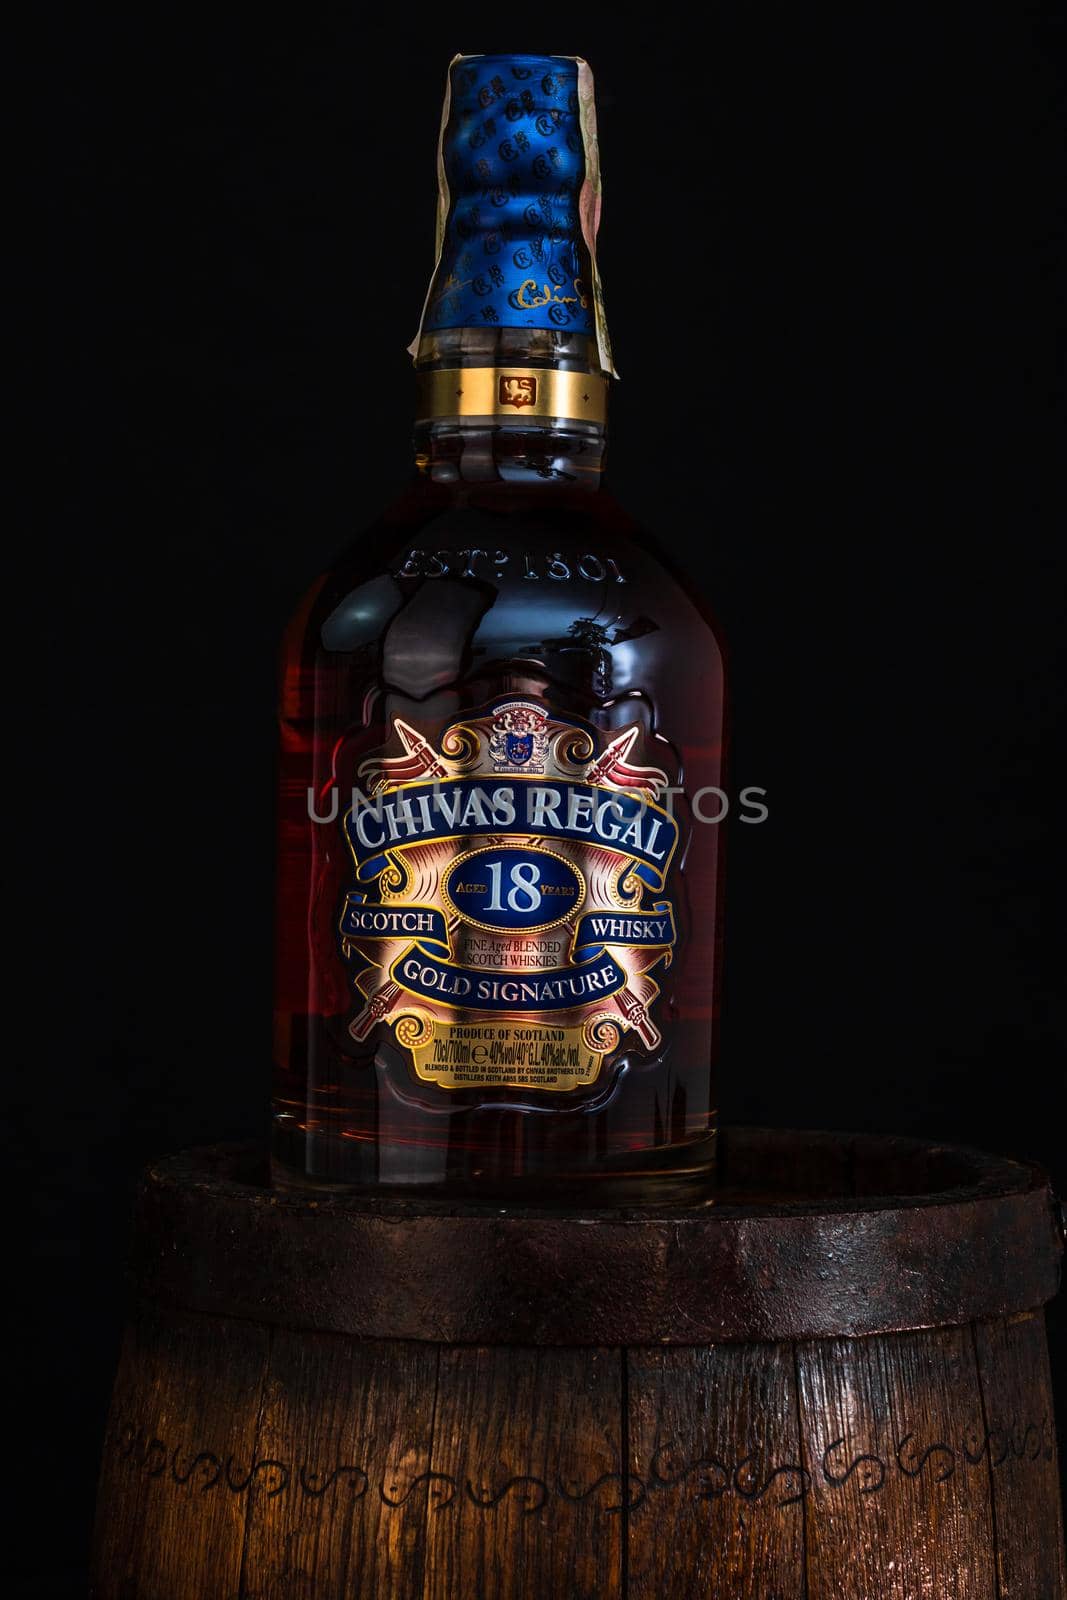 Chivas Regal 18 is blended from whiskies matured for at least 18 years. Whisky bottle on barrel. Illustrative editorial photo Bucharest, Romania, 2021 by vladispas